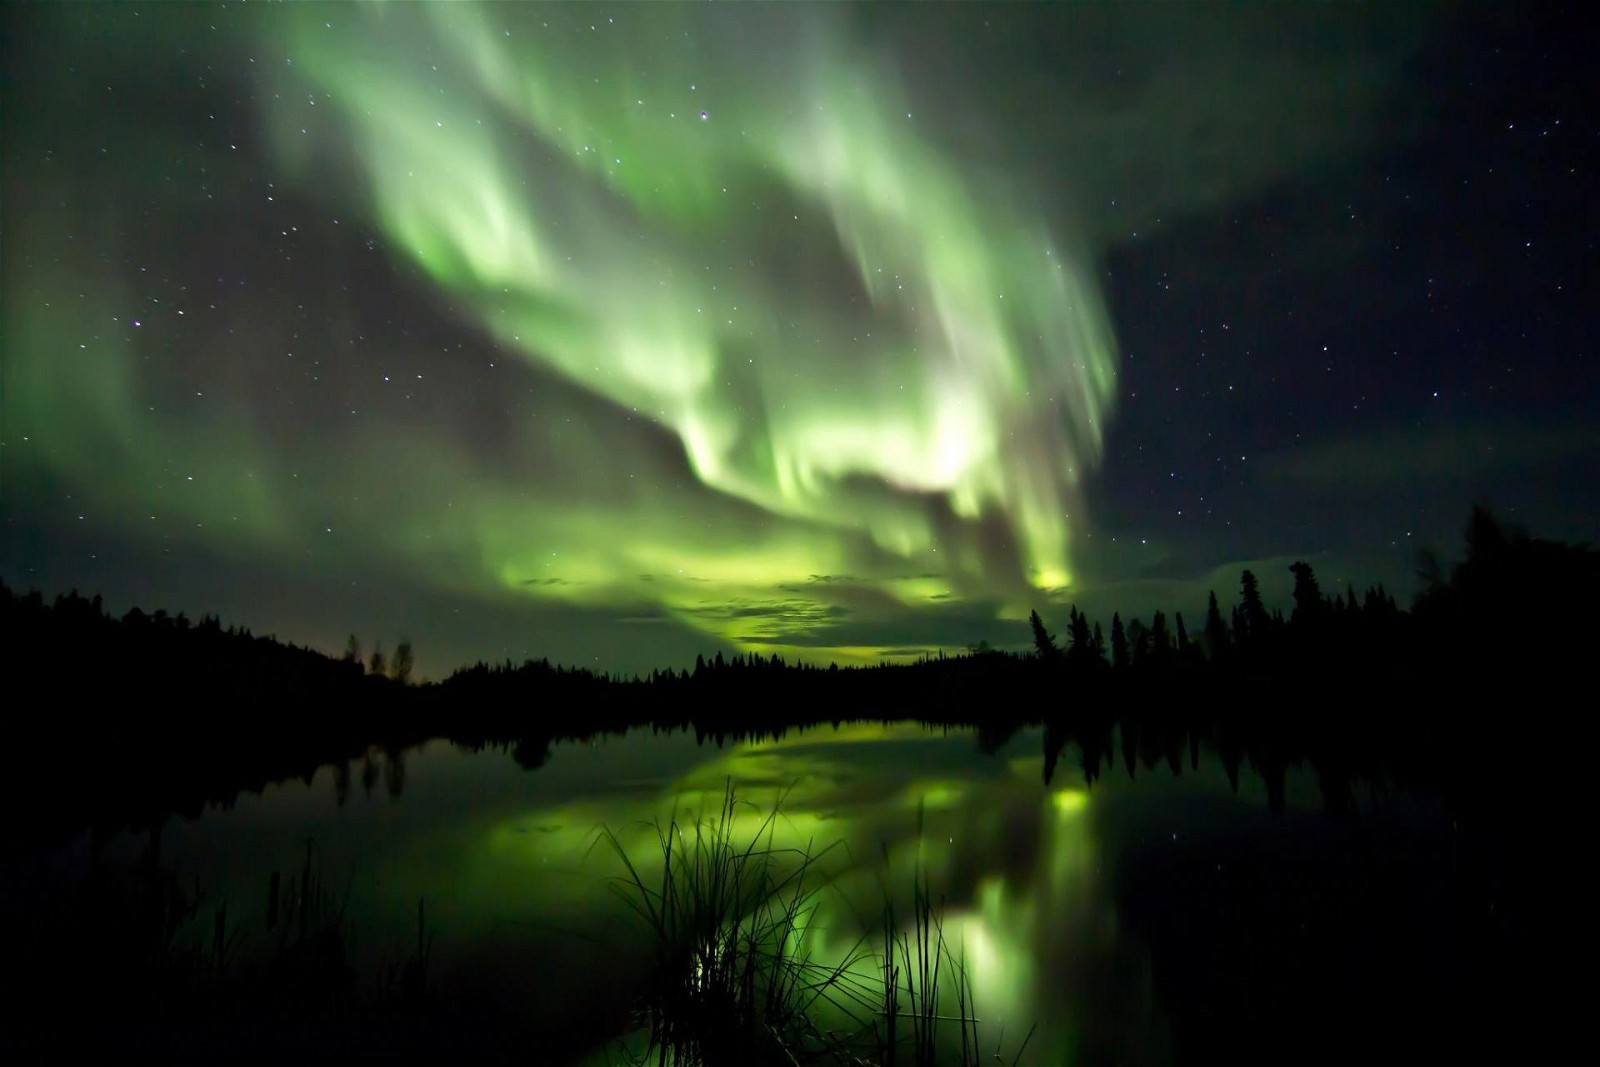 Canada offers a wide range of adventure activities. If you're visiting Yukon, don't miss the chance to witness the stunning Northern Lights